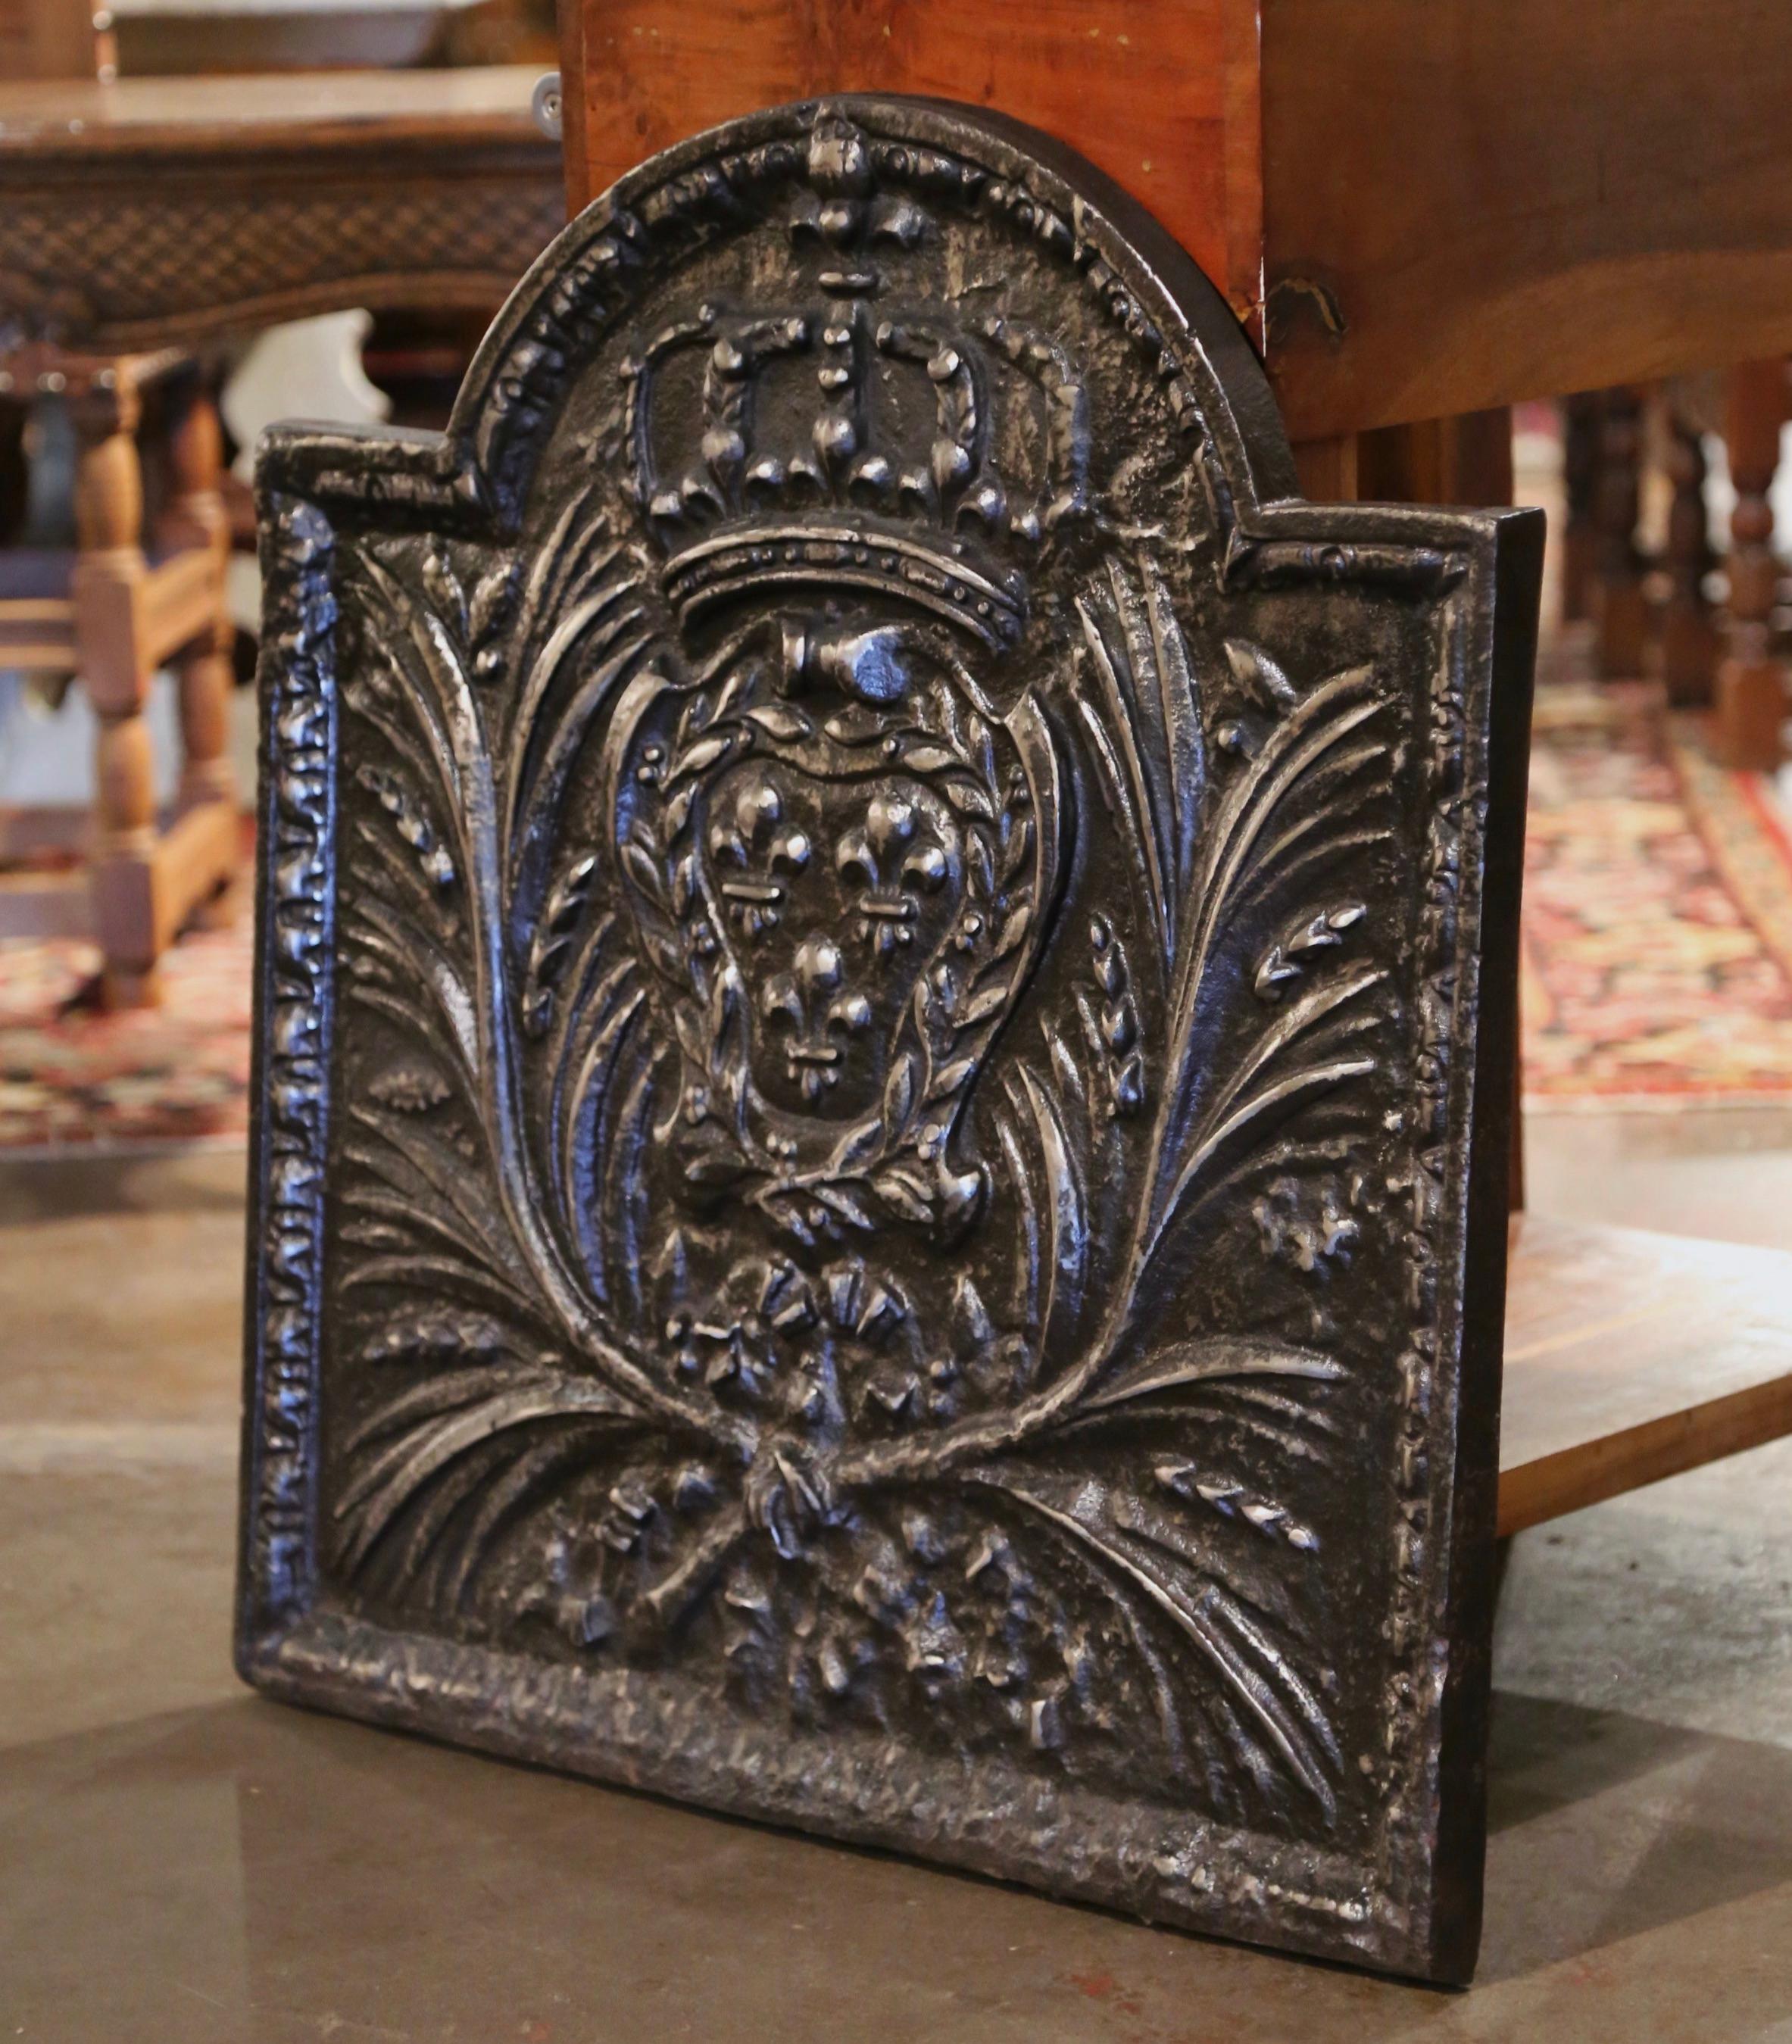 Decorate your fireplace or kitchen back splash with this elegant antique fire back. Crafted in France circa 1850 and almost square in shape, the ornate arched fireplace essential features a center medallion with the Royal Arms of France after